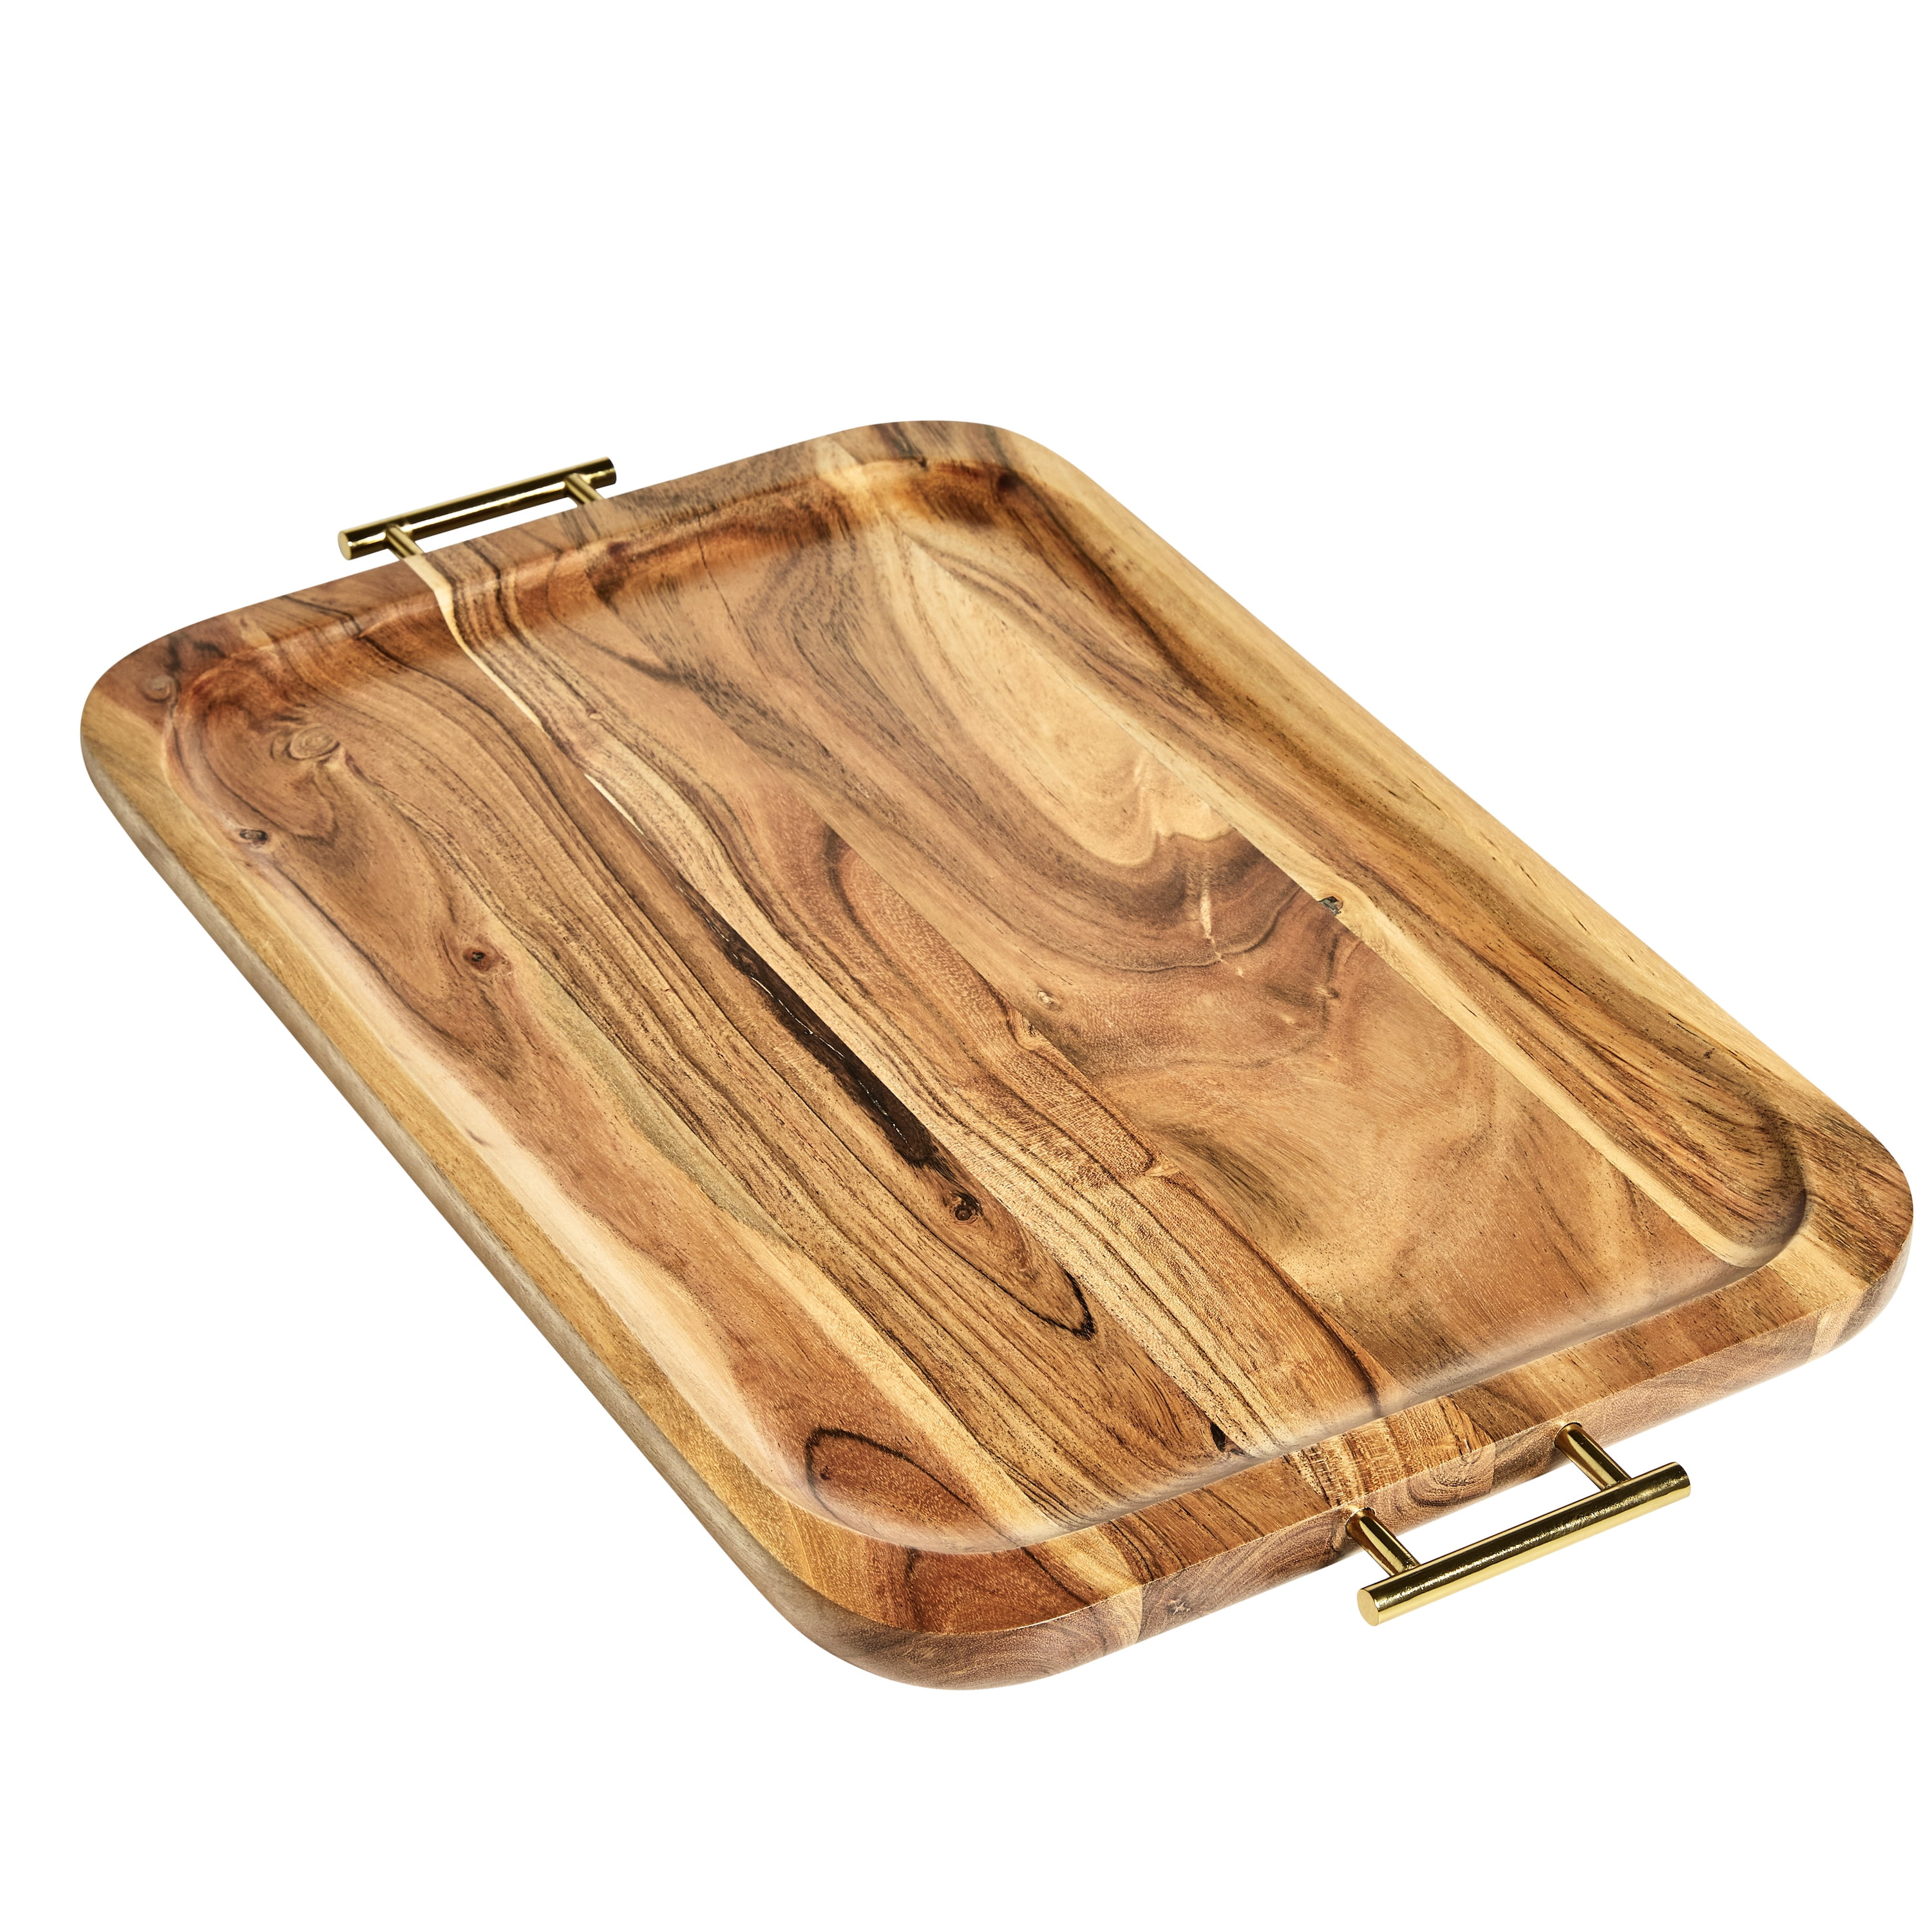 Serving Tray with Handles + Reviews